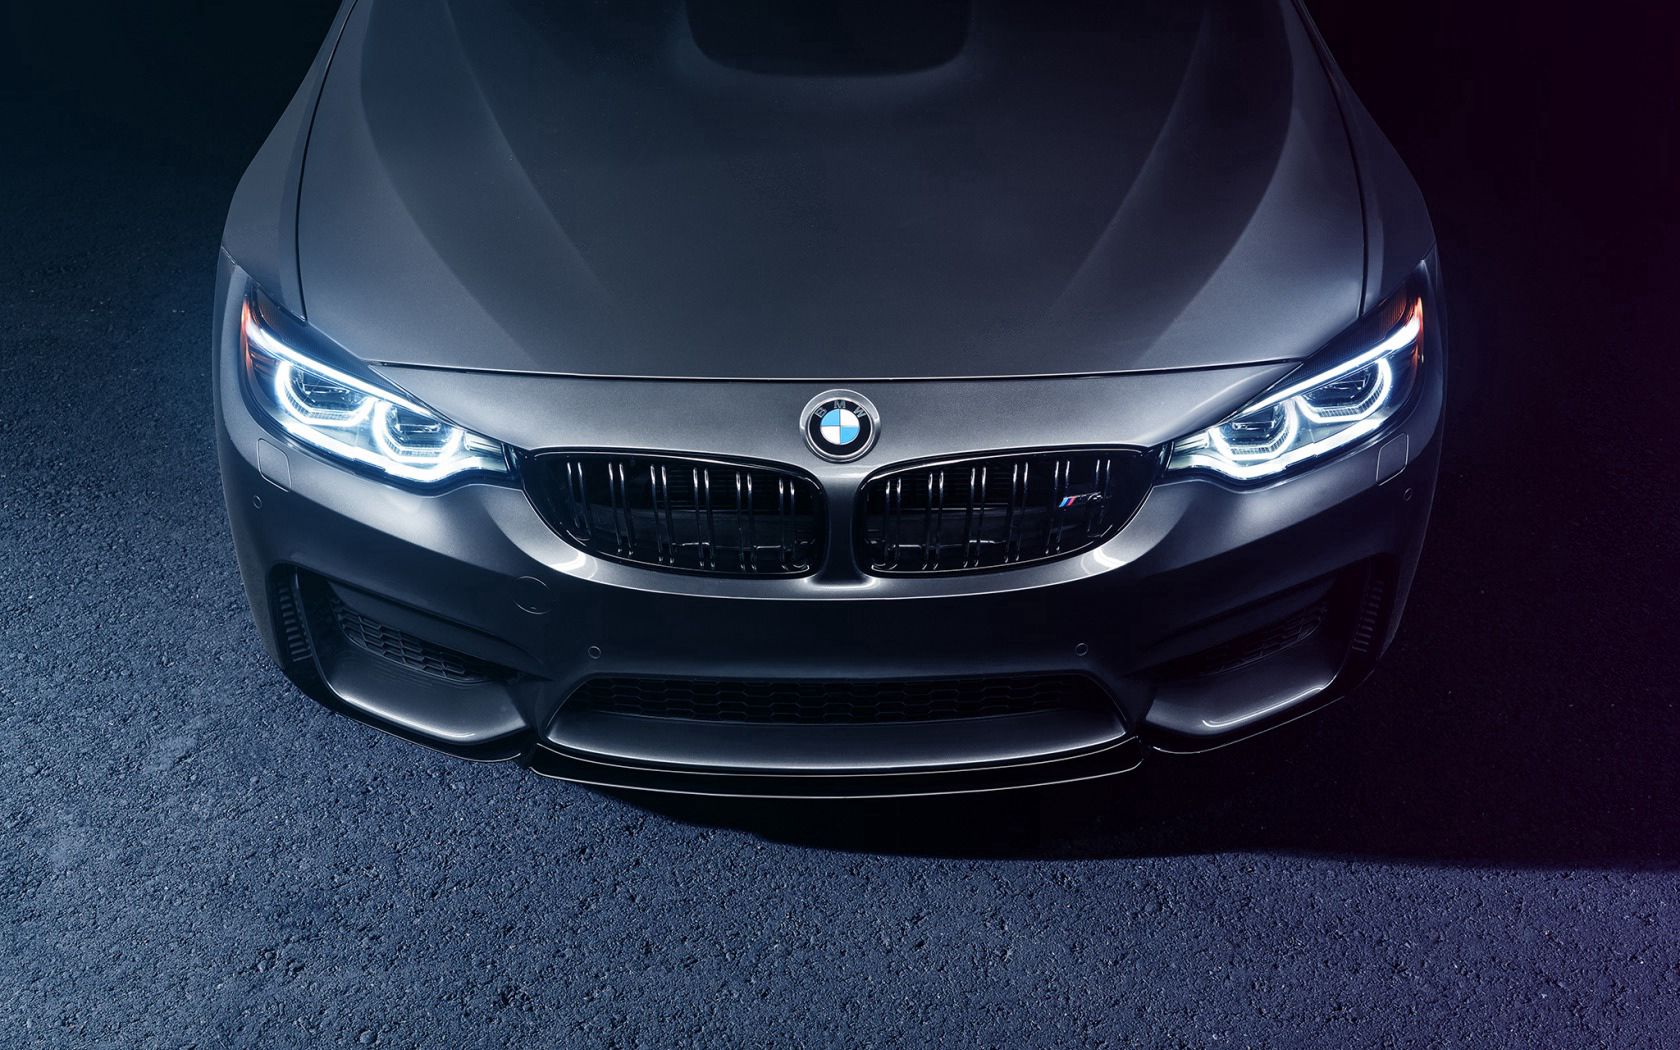 131587 download wallpaper bmw, cars, front view, hood, m4 screensavers and pictures for free